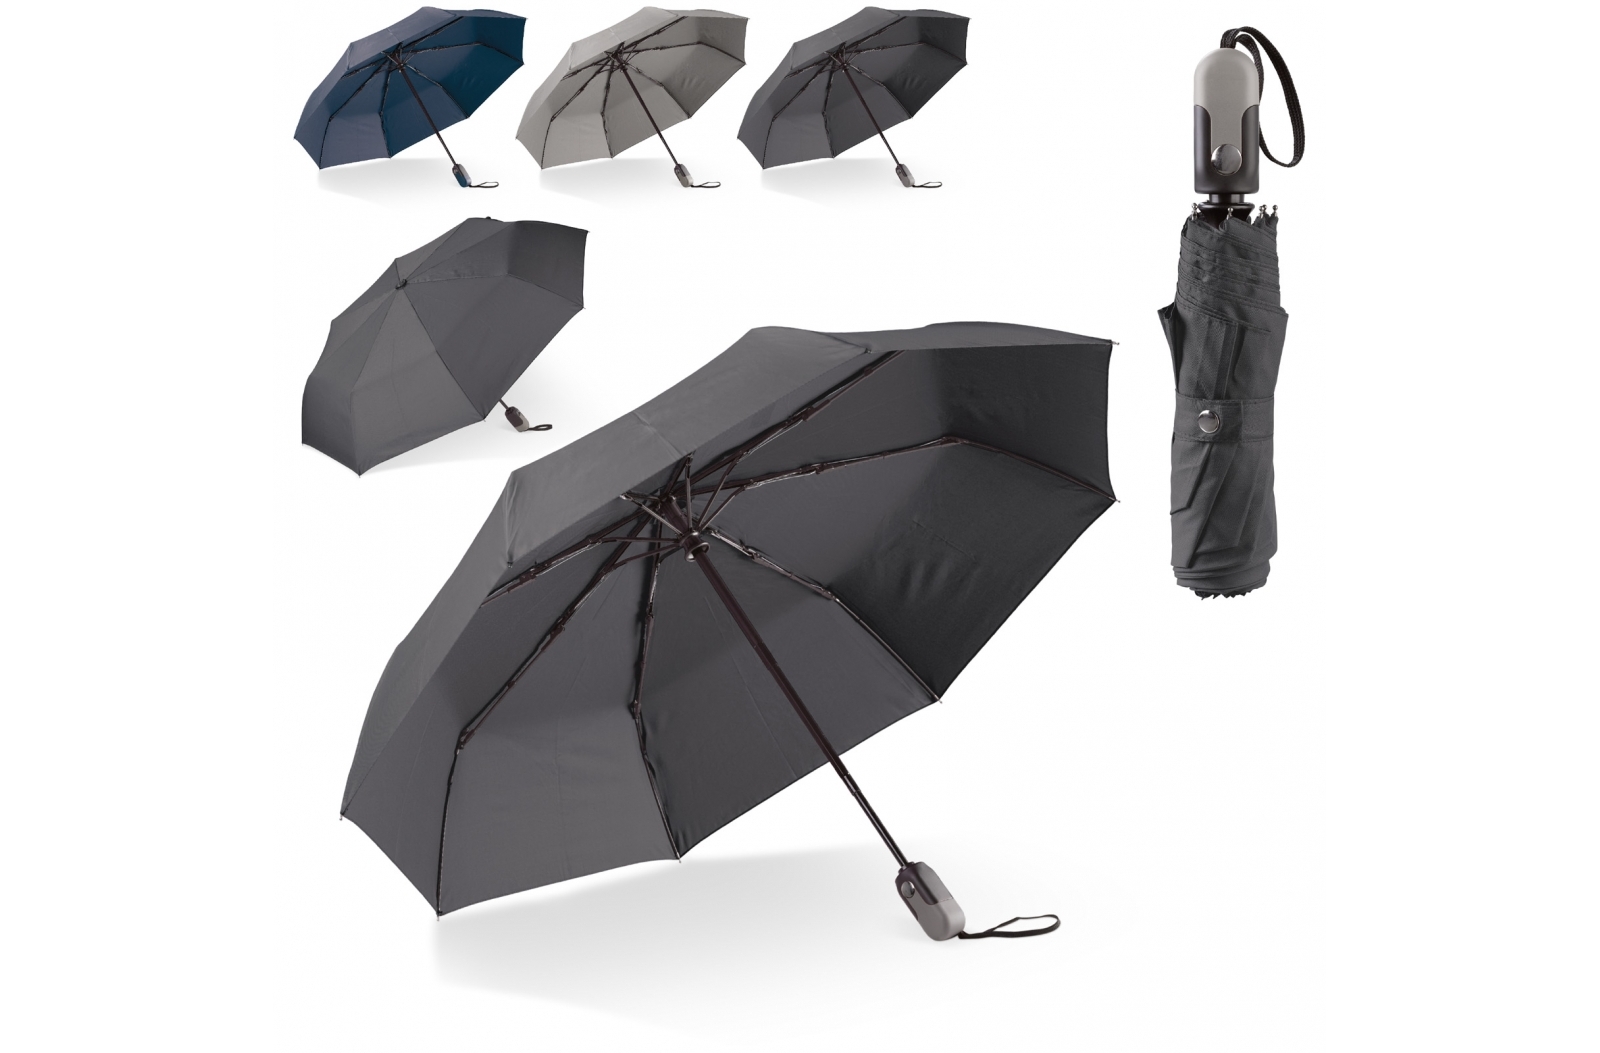 Luxurious Foldable Business Umbrella with Automatic Open-Close Mechanism - Guildford